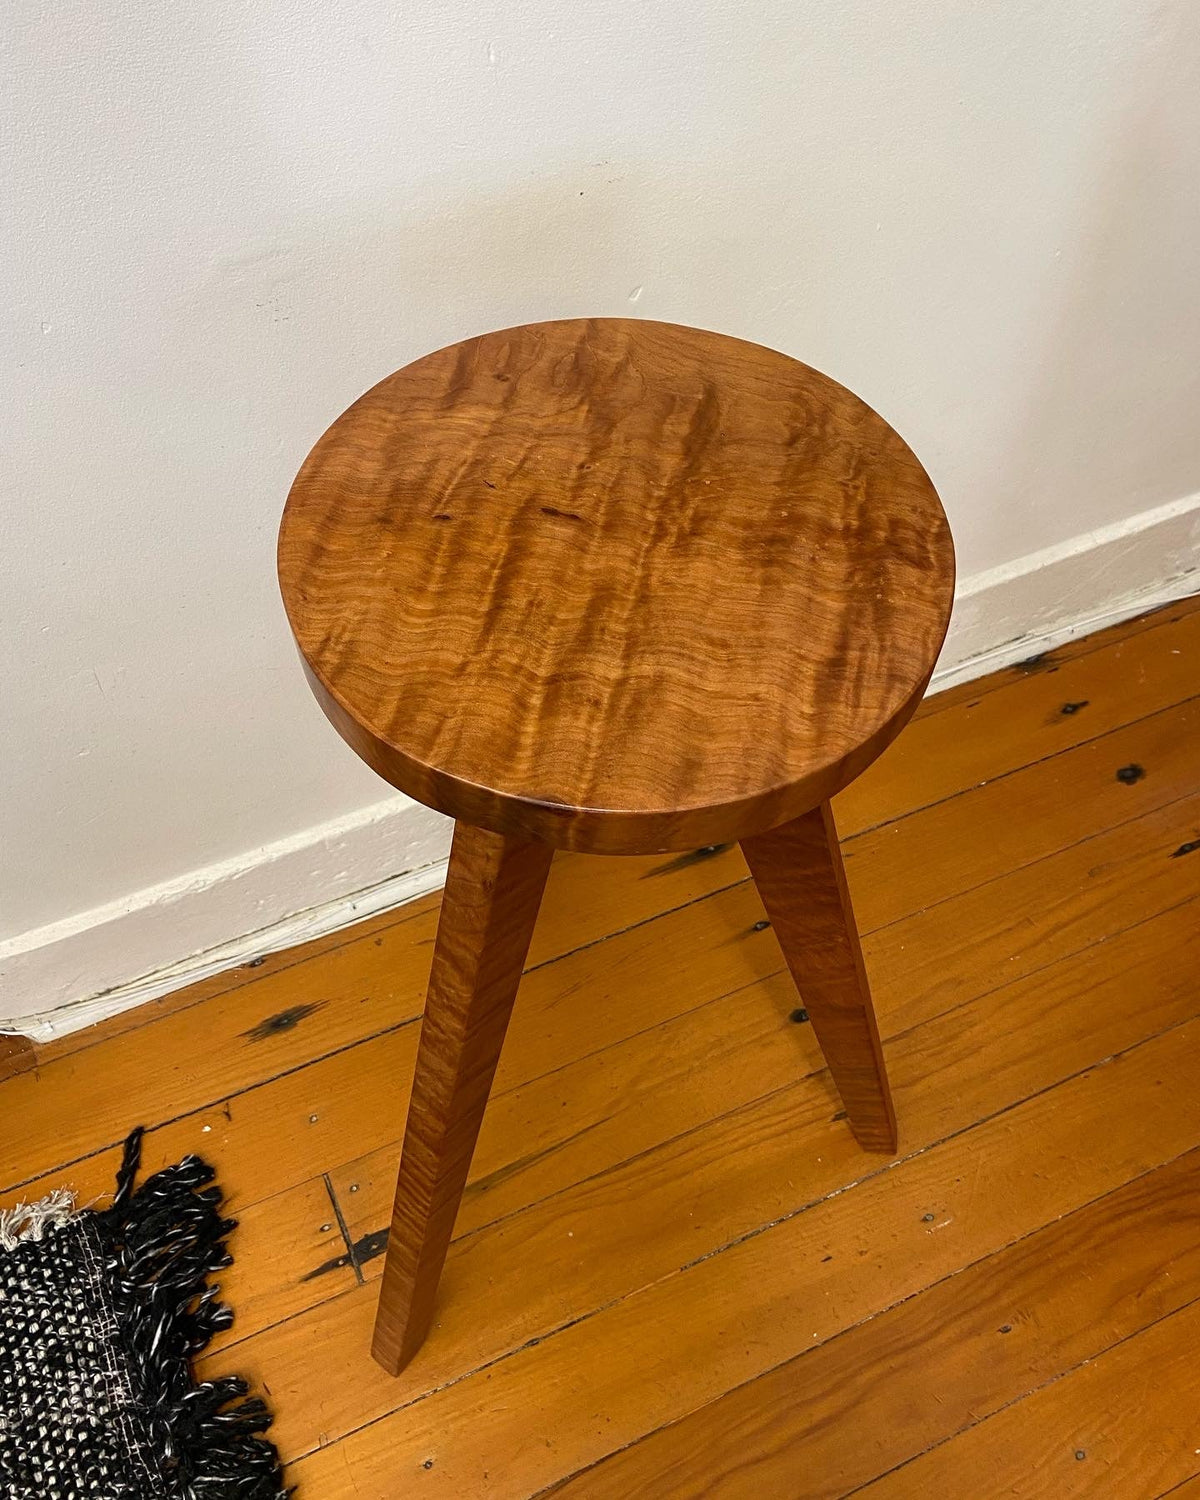 The Sowman Stool